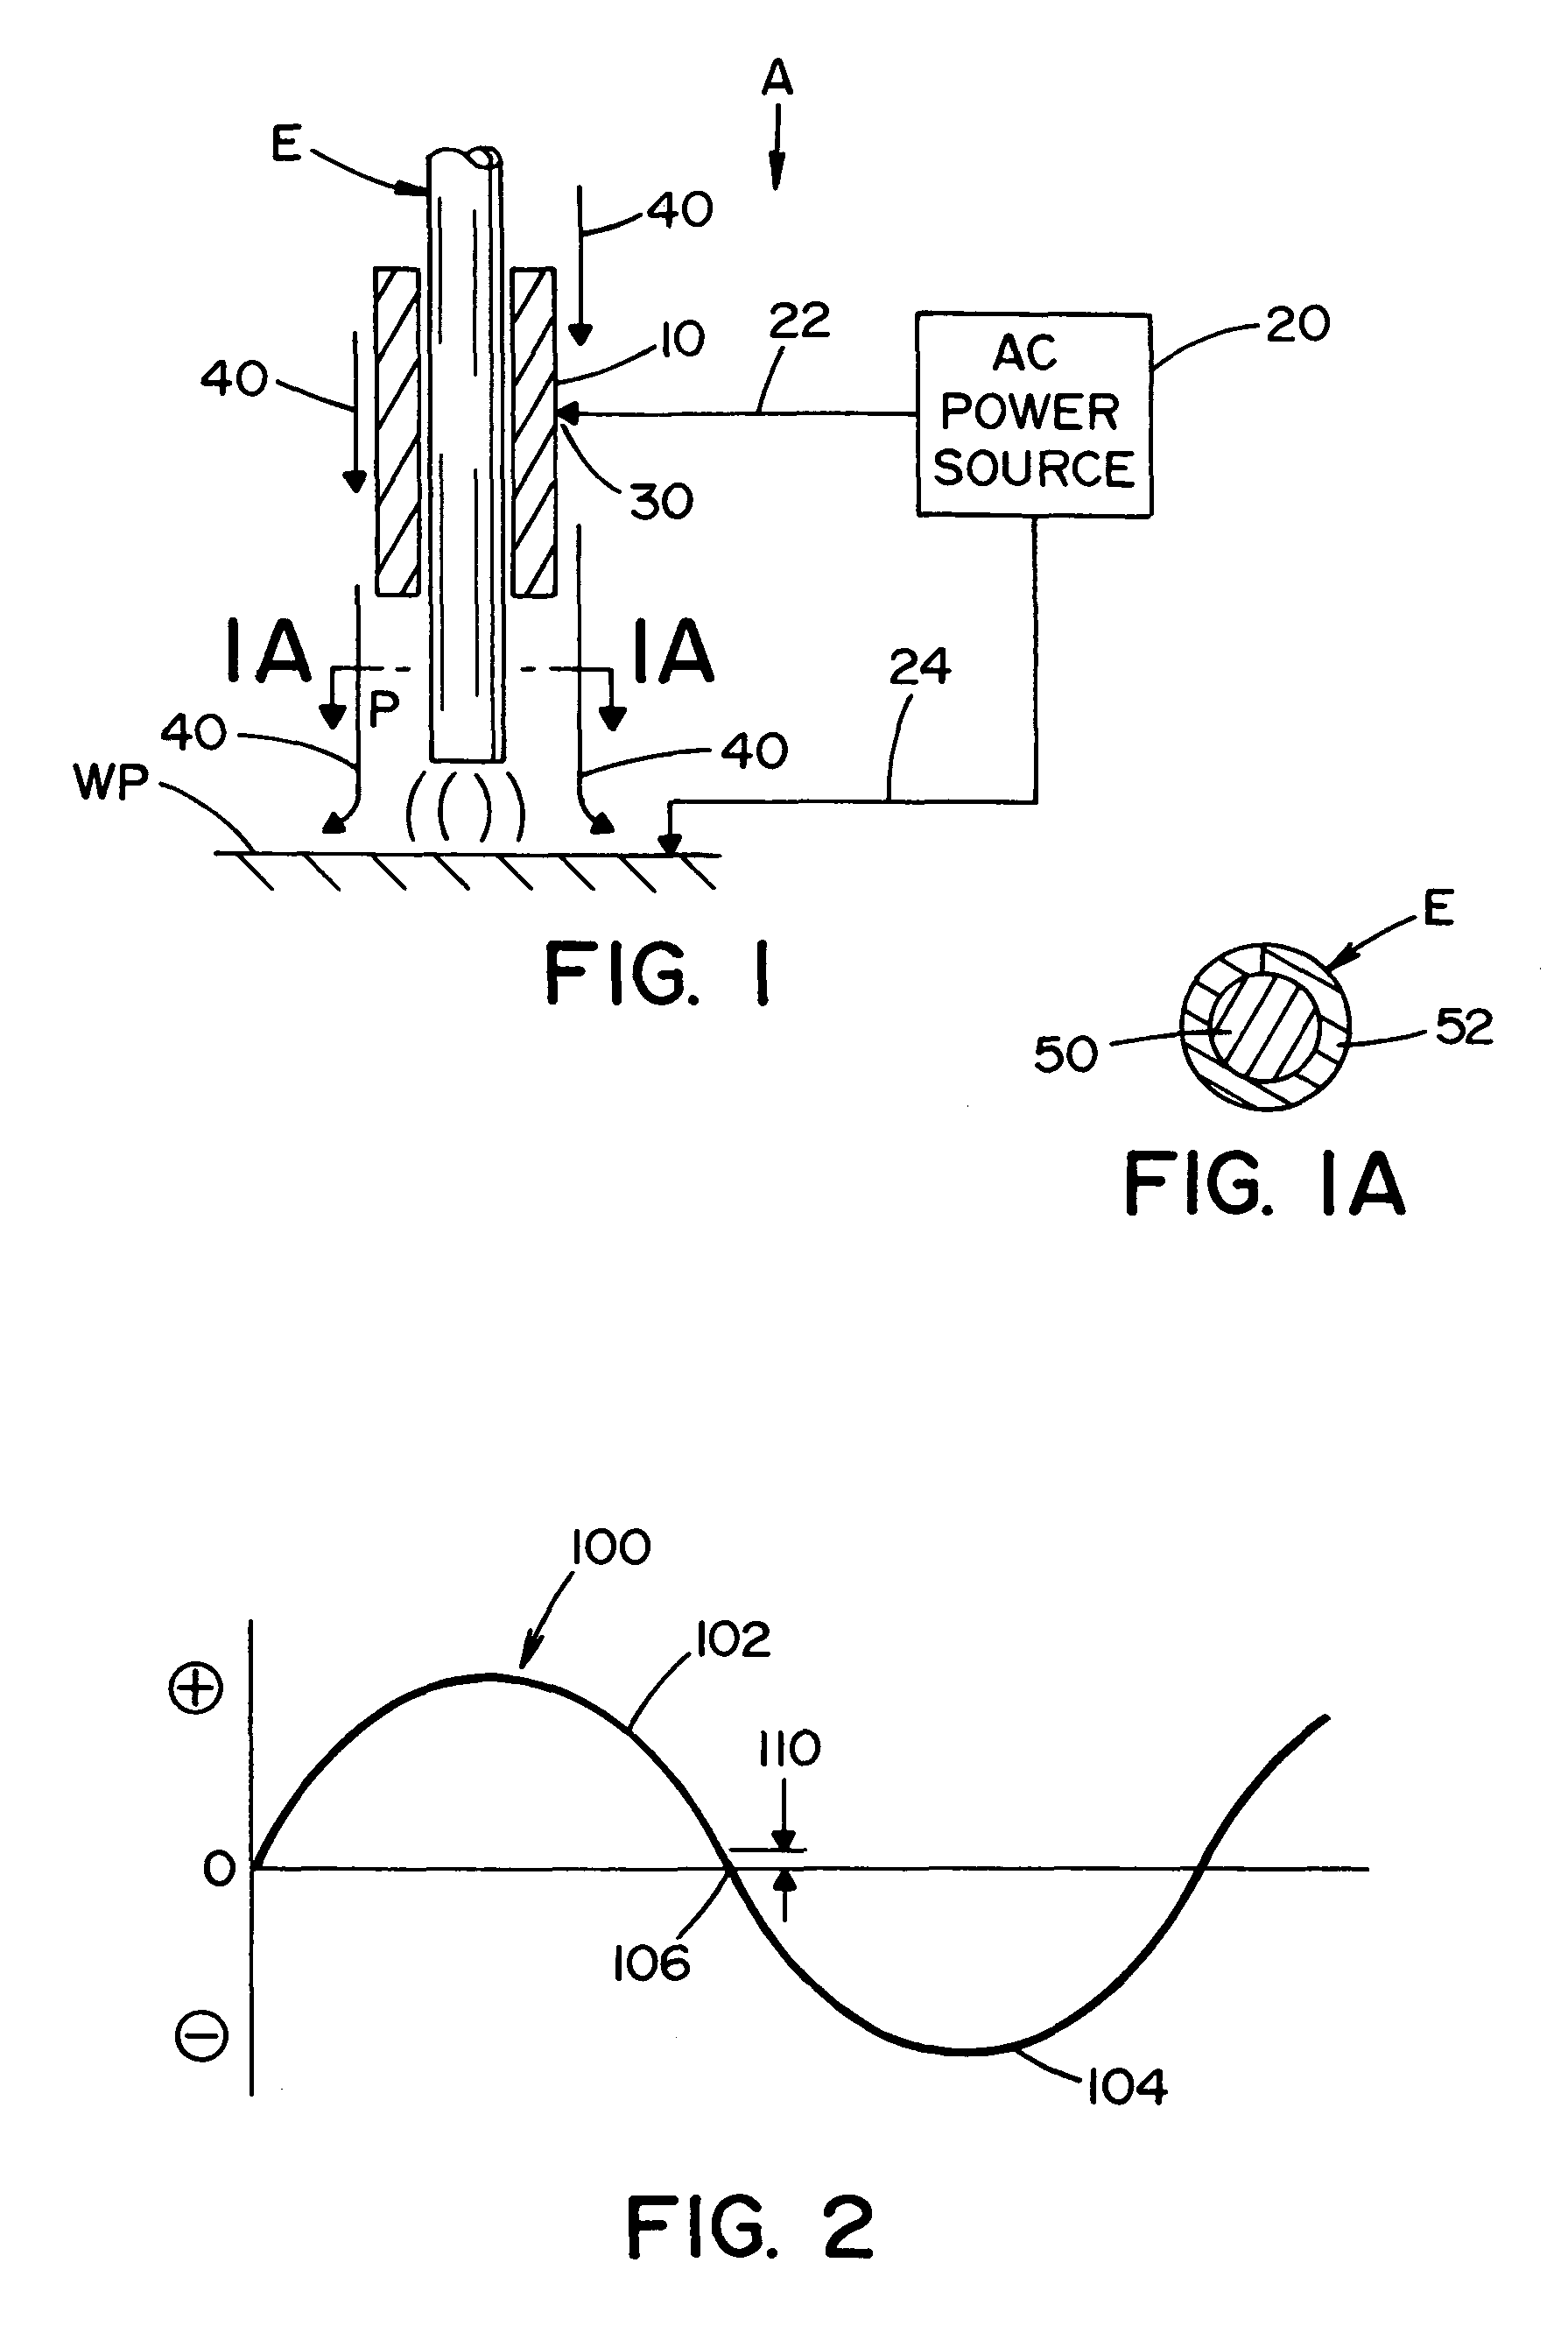 Method of AC welding using a flux cored electrode